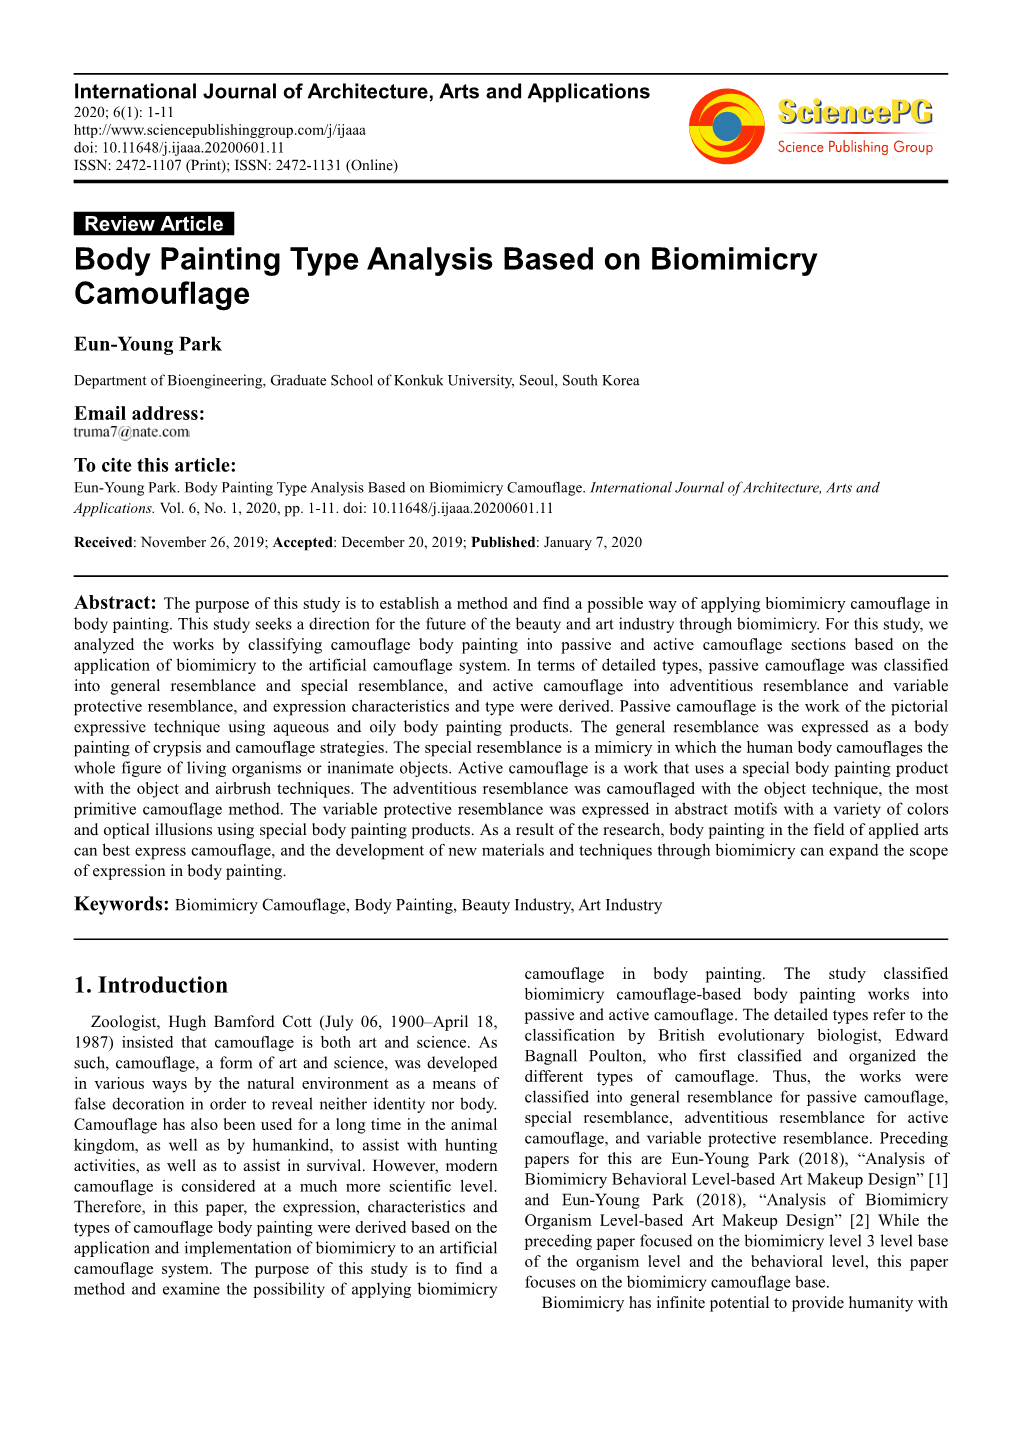 Body Painting Type Analysis Based on Biomimicry Camouflage